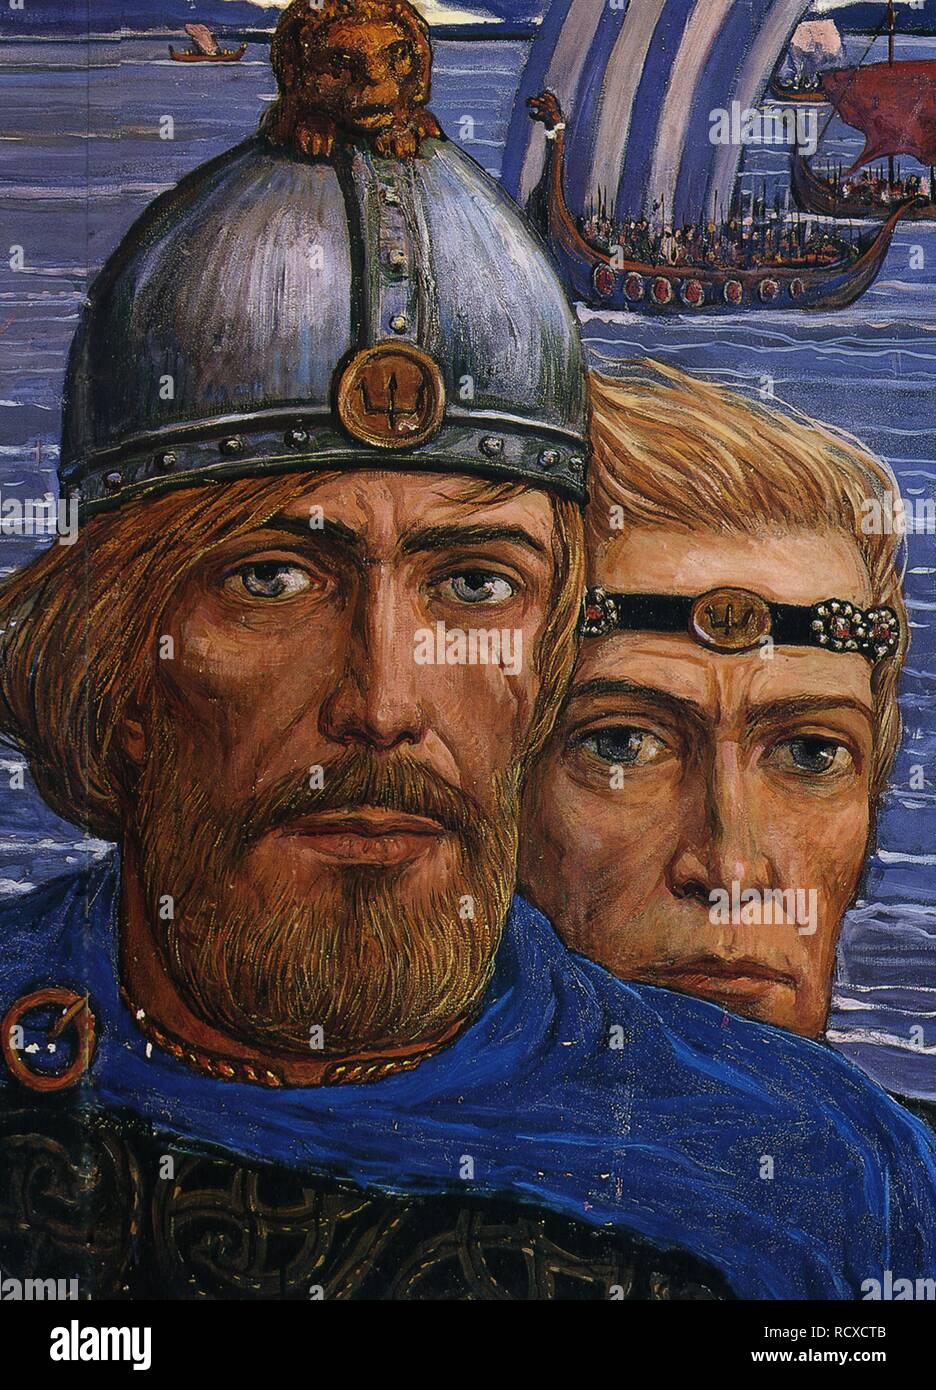 Grandchildren of Gostomysl: Rurik, Sineus and Truvor (Detail). Museum: PRIVATE COLLECTION. Author: Glazunov, Ilya Sergeyevich. Copyright: This artwork is not in public domain. It is your responsibility to obtain all necessary third party permissions from the copyright handler in your country prior to publication. Stock Photo